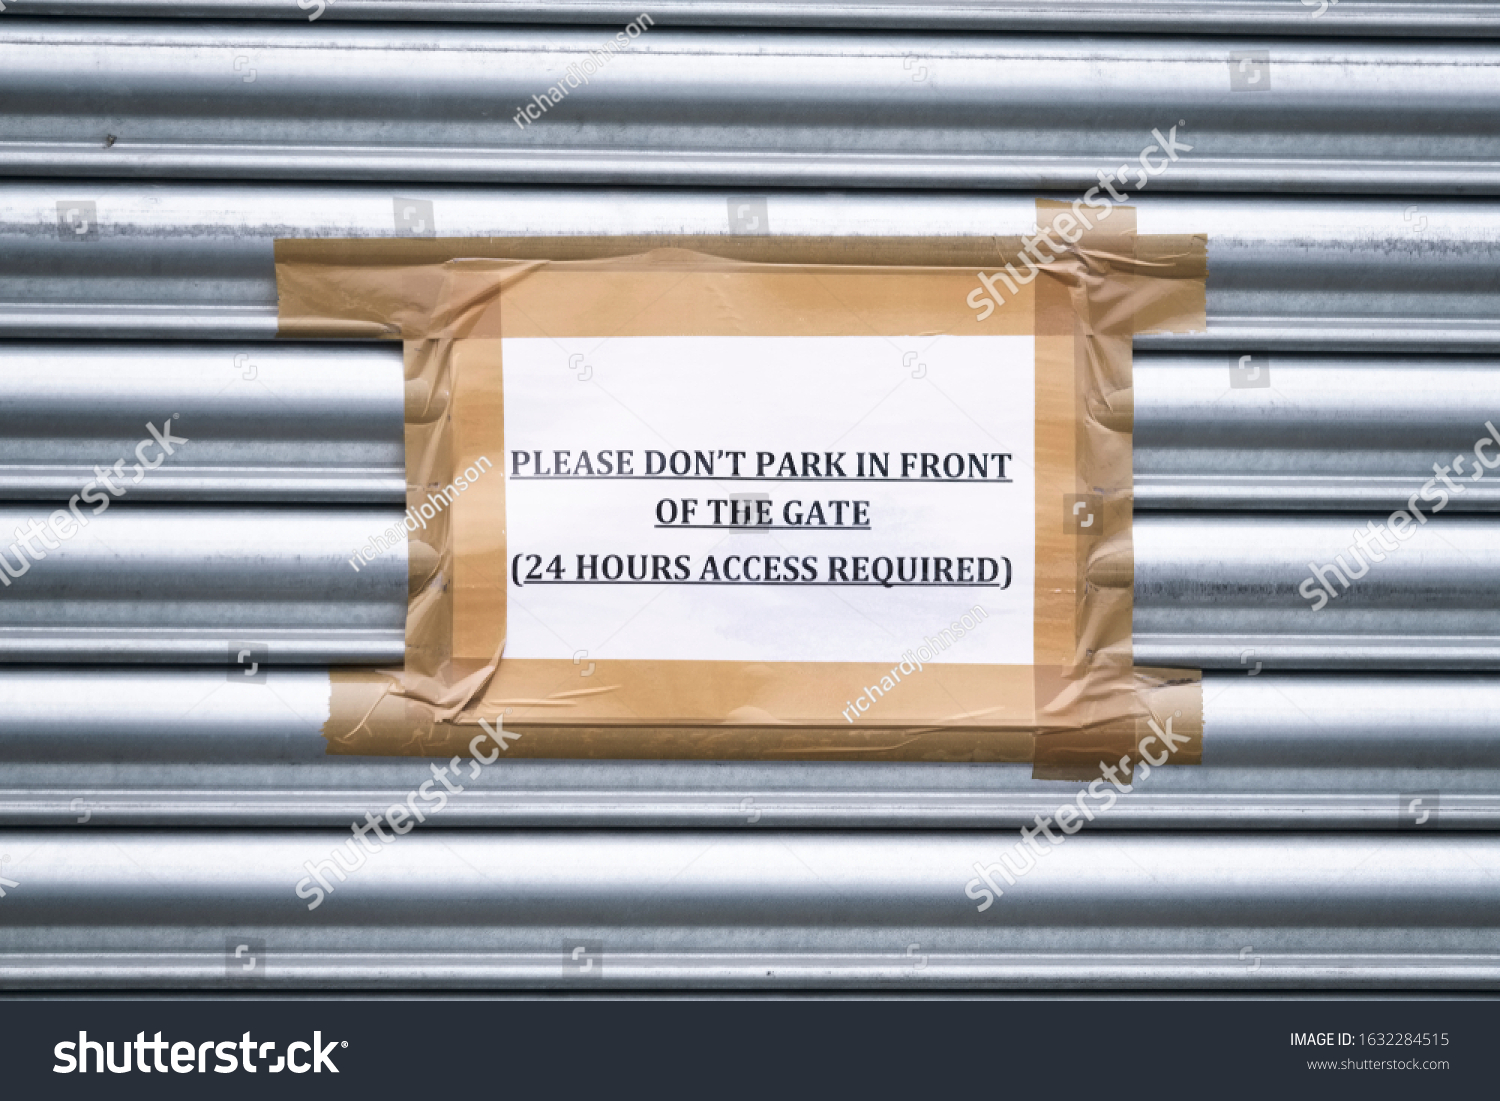 'PLEASE DO NOT PARK IN FRONT OF THIS GATE AS IT IS IN CONSTANT USE' SIGN 